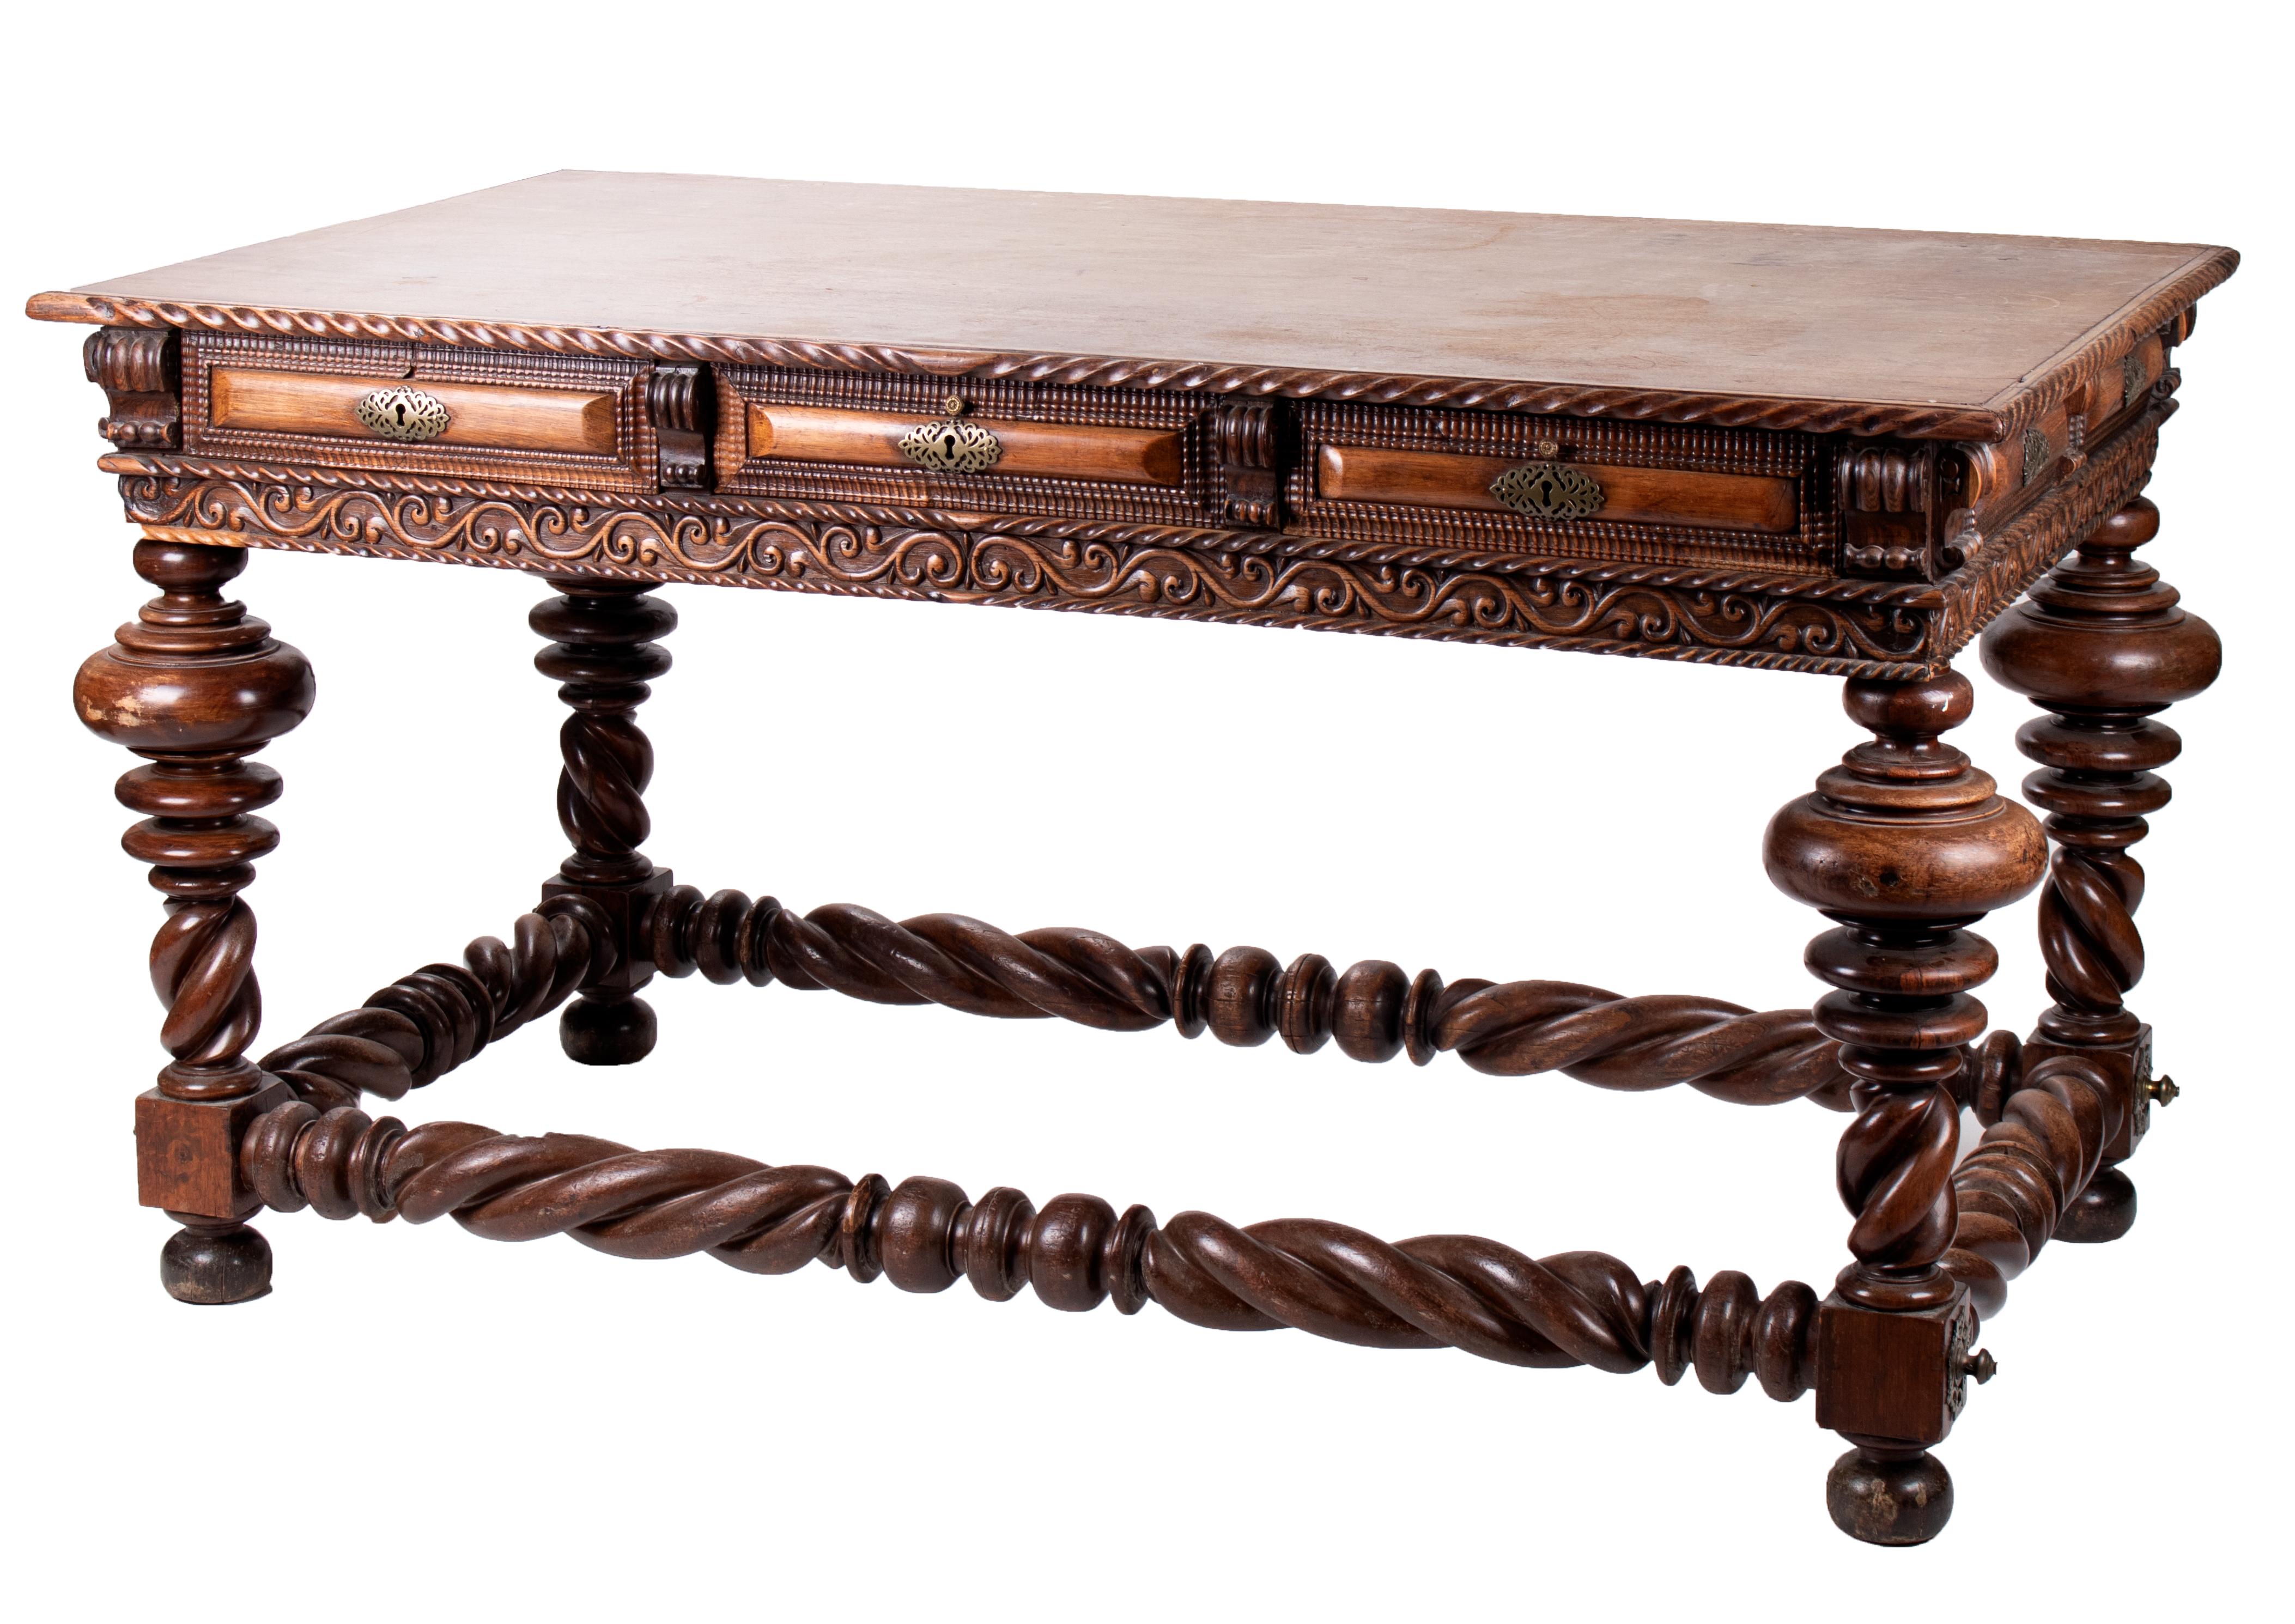 19th century Portuguese rosewood office desk with brass fittings.